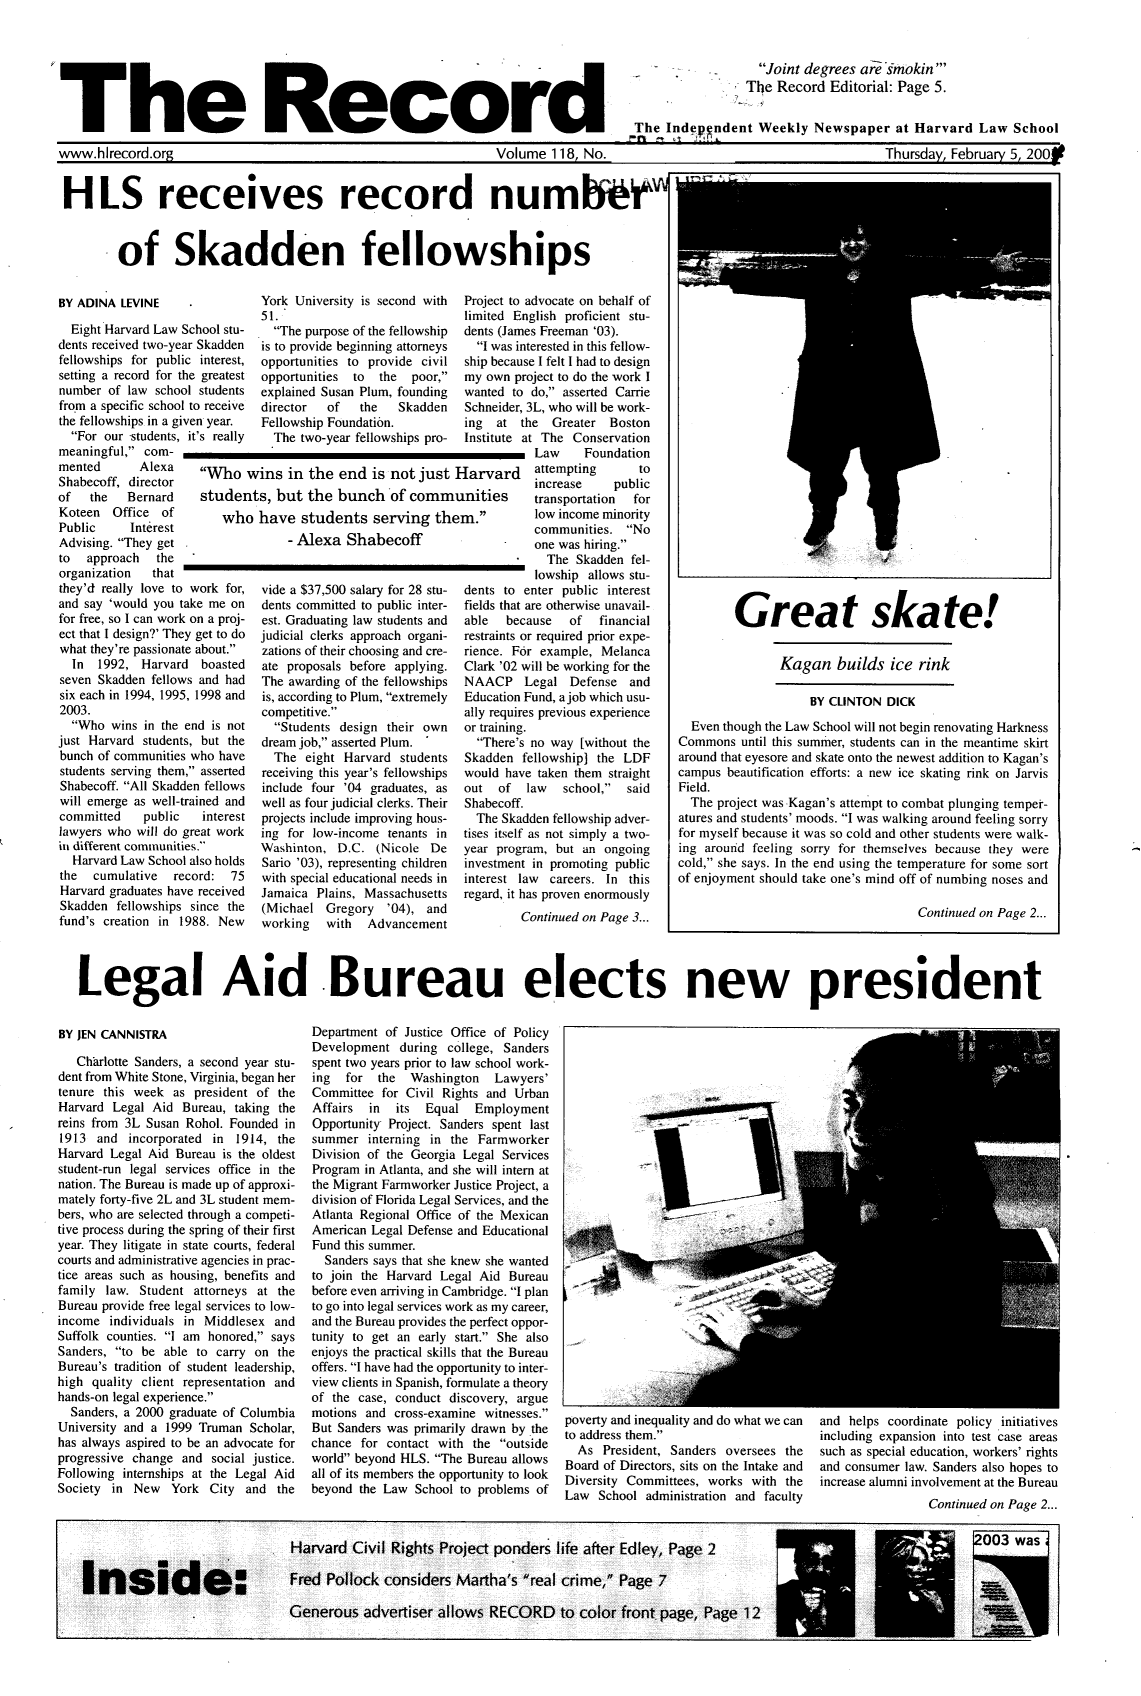 handle is hein.journals/hlrec118 and id is 1 raw text is: -   Joint degrees afesmokinThe Record Editorial: Page 5.'T    h     e      R     e    c    o    rdThe Independent Weekly Newspaper at Harvard Law Schoolwww.hlrecord.org                       Volume 118, No.                    Thursday, February 5, 200fHLS receives record num*Wof Skadden fellowshipsBY ADINA LEVINEEight Harvard Law School stu-dents received two-year Skaddenfellowships for public interest,setting a record for the greatestnumber of law school studentsfrom a specific school to receivethe fellowships in a given year.For our-students, it's reallymeaningful, com-mentedShabecoff,of  theYork University is second with51.The purpose of the fellowshipis to provide beginning attorneysopportunities to provide civilopportunities to the  poor,jexplained Susan Plum, foundingdirector  of  the   SkaddenFellowship Foundation.The two-year fellowships pro-Project to advocate on behalf oflimited English proficient stu-dents (James Freeman '03).I was interested in this fellow-ship because I felt I had to designmy own project to do the work Iwanted to do, asserted CarrieSchneider, 3L, who will be work-ing  at the   Greater BostonInstitute at The ConservationLaw     FoundationAlexa    Who wins in the end is not just Harvard        attempting      todirector                                                   increase   publicBernard    students, but the bunch of communities          transportation  forKoteen  Office  of       whiPublic     InterestAdvising. They getto  approach  theorganization  thatthey'd really love to work for,and say 'would you take me onfor free, so I can work on a proj-ect that I design?' They get to dowhat they're passionate about.In  1992, Harvard  boastedseven Skadden fellows and hadsix each in 1994, 1995, 1998 and2003.Who wins in the end is notjust Harvard students, but thebunch of communities who havestudents serving them, assertedShabecoff. All Skadden fellowswill emerge as well-trained andcommitted    public  interestlawyers who will do great workin different communities.Harvard Law School also holdsthe  cumulative  record:  75Harvard graduates have receivedSkadden fellowships since thefund's creation in 1988. NewL have students serving ther- Alexa Shabecoffvide a $37,500 salary for 28 stu-dents committed to public inter-est. Graduating law students andjudicial clerks approach organi-zations of their choosing and cre-ate proposals before applying.The awarding of the fellowshipsis, according to Plum, extremelycompetitive.Students design their owndream job, asserted Plum.The eight Harvard studentsreceiving this year's fellowshipsinclude four '04 graduates, aswell as four judicial clerks. Theirprojects include improving hous-ing for low-income tenants inWashinton, D.C. (Nicole DeSario '03), representing childrenwith special educational needs inJamaica Plains, Massachusetts(Michael Gregory '04), andworking   with  Advancementlow income minoritycommunities. Noone was hiring.The Skadden fel-lowship allows stu-dents to enter public interestfields that are otherwise unavail-able  because   of  financialrestraints or required prior expe-rience. For example, MelancaClark '02 will be working for theNAACP Legal Defense andEducation Fund, a job which usu-ally requires previous experienceor training.There's no way [without theSkadden fellowship] the LDFwould have taken them straightout  of  law   school,  saidShabecoff.The Skadden fellowship adver-tises itself as not simply a two-year program, but an ongoinginvestment in promoting publicinterest law careers. In thisregard, it has proven enormouslyContinued on Page 3...Legal Aid -Bureau elects new presidentBY JEN CANNISTRACharlotte Sanders, a second year stu-dent from White Stone, Virginia, began hertenure this week as president of theHarvard Legal Aid Bureau, taking thereins from 3L Susan Rohol. Founded in1913 and incorporated in 1914, theHarvard Legal Aid Bureau is the oldeststudent-run legal services office in thenation. The Bureau is made up of approxi-mately forty-five 2L and 3L student mem-bers, who are selected through a competi-tive process during the spring of their firstyear. They litigate in state courts, federalcourts and administrative agencies in prac-tice areas such as housing, benefits andfamily law. Student attorneys at theBureau provide free legal services to low-income individuals in Middlesex andSuffolk counties. I am honored, saysSanders, to be able to carry on theBureau's tradition of student leadership,high quality client representation andhands-on legal experience.Sanders, a 2000 graduate of ColumbiaUniversity and a 1999 Truman Scholar,has always aspired to be an advocate forprogressive change and social justice.Following internships at the Legal AidSociety in New York City and theDepartment of Justice Office of PolicyDevelopment during college, Sandersspent two years prior to law school work-ing  for  the  Washington   Lawyers'Committee for Civil Rights and UrbanAffairs  in  its  Equal  EmploymentOpportunity Project. Sanders spent lastsummer interning in the FarmworkerDivision of the Georgia Legal ServicesProgram in Atlanta, and she will intern atthe Migrant Farmworker Justice Project, adivision of Florida Legal Services, and theAtlanta Regional Office of the MexicanAmerican Legal Defense and EducationalFund this summer.Sanders says that she knew she wantedto join the Harvard Legal Aid Bureaubefore even arriving in Cambridge. I planto go into legal services work as my career,and the Bureau provides the perfect oppor-tunity to get an early start. She alsoenjoys the practical skills that the Bureauoffers. I have had the opportunity to inter-view clients in Spanish, formulate a theoryof the case, conduct discovery, arguemotions and cross-examine witnesses.But Sanders was primarily drawn by thechance for contact with the outsideworld beyond HLS. The Bureau allowsall of its members the opportunity to lookbeyond the Law School to problems ofpoverty and inequality and do what we can  and helps coordinate policy initiativesto address them.                      including expansion into test case areasAs President, Sanders oversees the   such as special education, workers' rightsBoard of Directors, sits on the Intake and  and consumer law. Sanders also hopes toDiversity Committees, works with the   increase alumni involvement at the BureauLaw  School administration and faculty                  Continued on Page 2...Great skate!Kagan builds ice rinkBY CLINTON DICKEven though the Law School will not begin renovating HarknessCommons until this summer, students can in the meantime skirtaround that eyesore and skate onto the newest addition to Kagan'scampus beautification efforts: a new ice skating rink on JarvisField.The project was Kagan's attempt to combat plunging temper-atures and students' moods. I was walking around feeling sorryfor myself because it was so cold and other students were walk-ing around feeling sorry for themselves because they werecold, she says. In the end using the temperature for some sortof enjoyment should take one's mind off of numbing noses andContinued on Page 2...m.°t